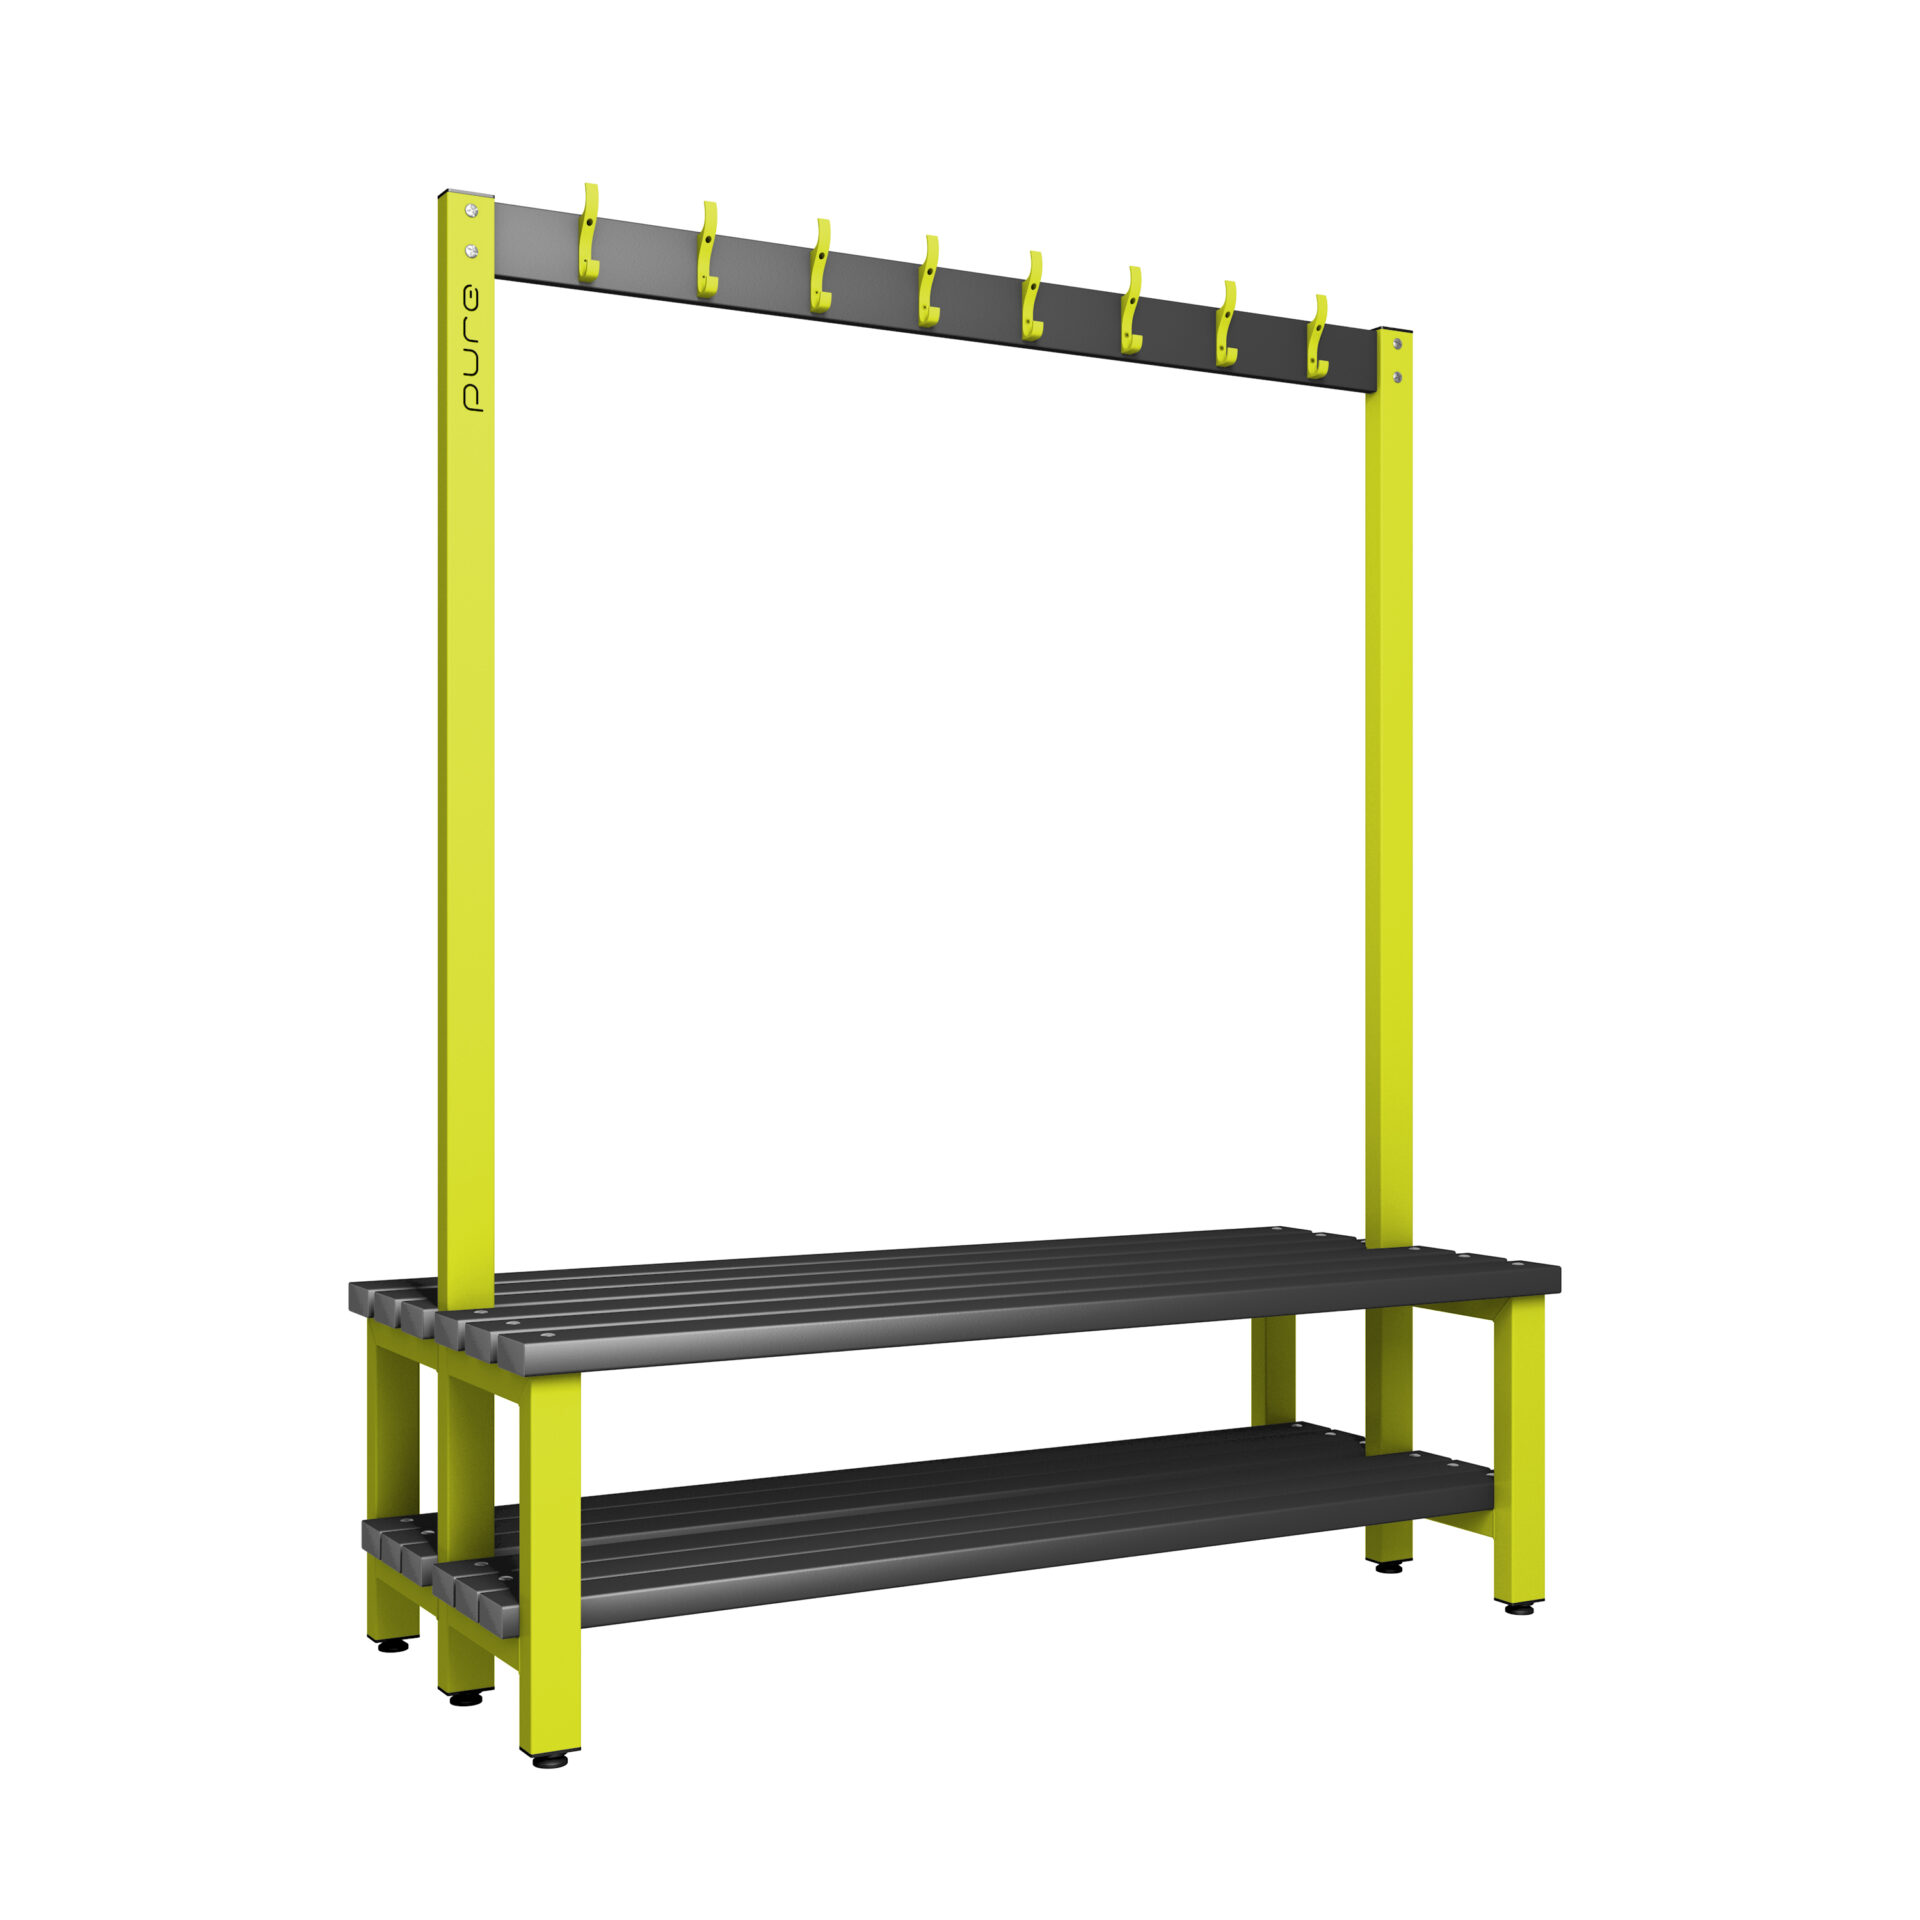 Pure Carbon Zero Double Sided 1500mm 16 Hook Bench With Shoe Shelf